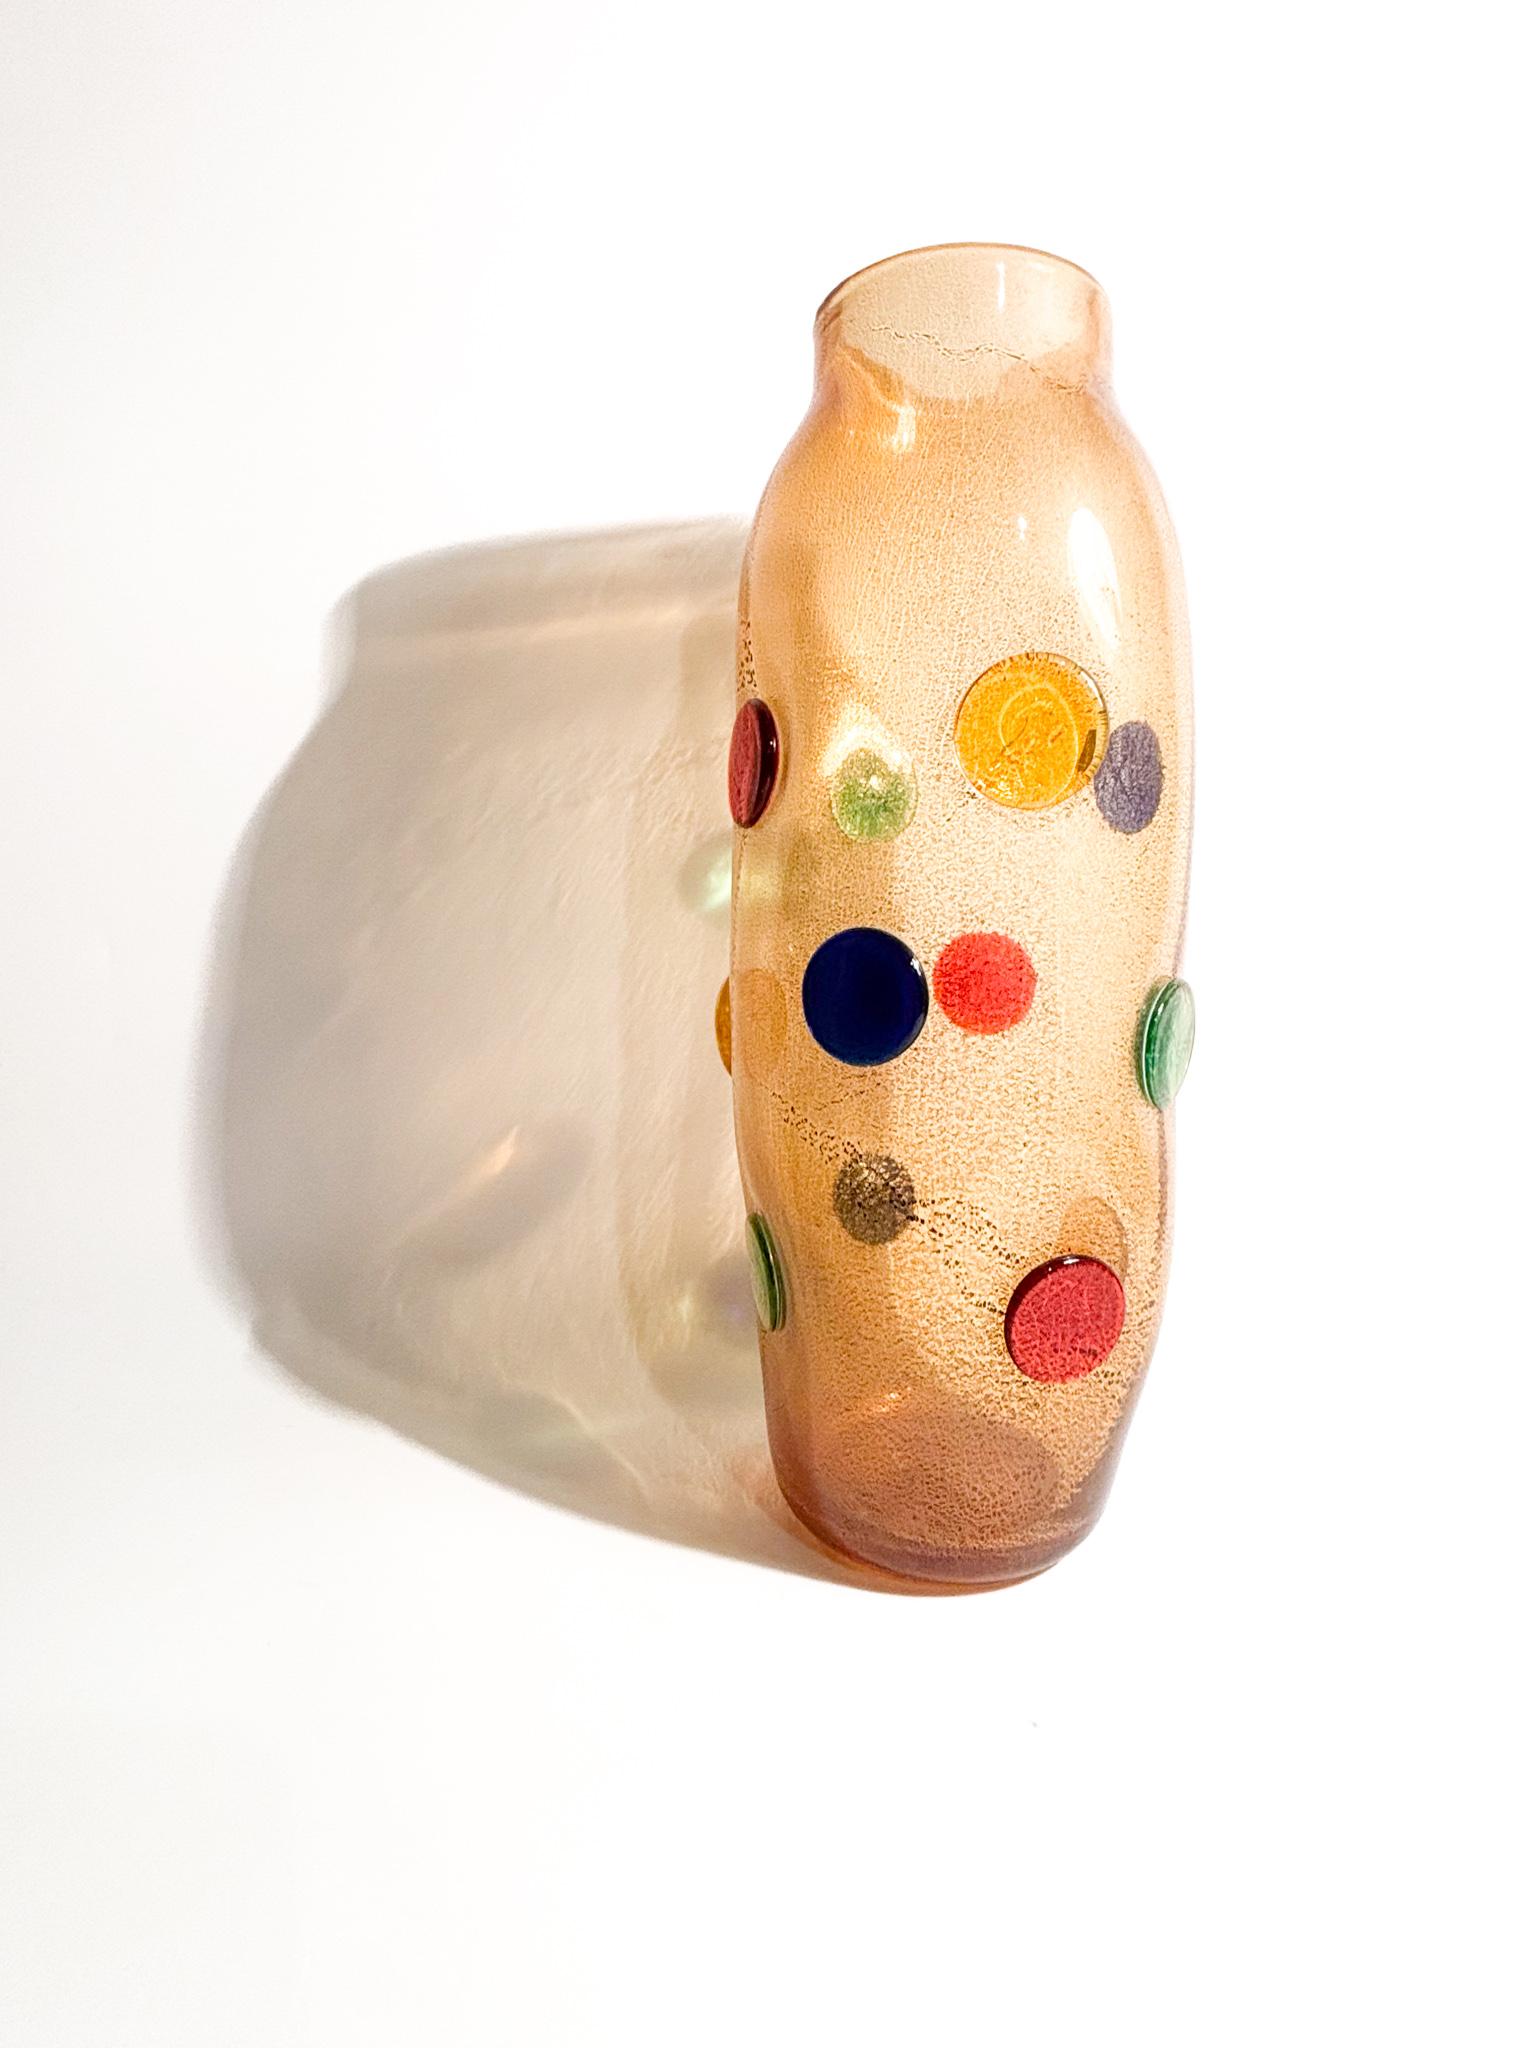 La Murrina Vase in Multicolored Murano Glass with Gold Leaf from the 1980s For Sale 5